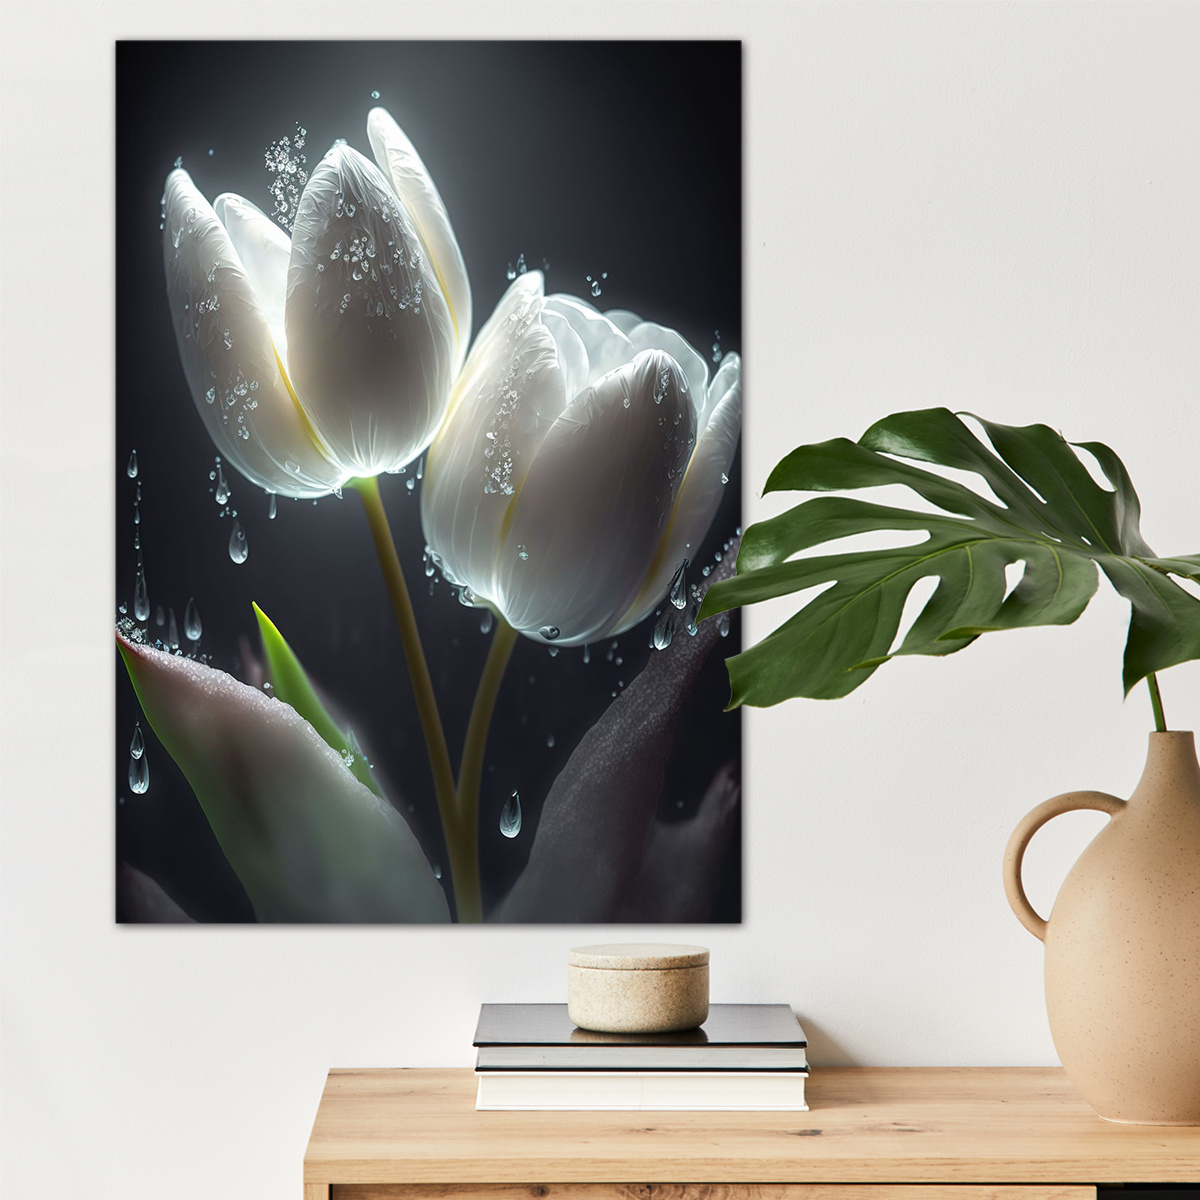 

1pc White Tulips Flowers Canvas Wall Art For Home Decor, High Quality Wall Decor, Canvas Prints For Living Room Bedroom Bathroom Kitchen Office Cafe Decor, Perfect Gift And Decoration